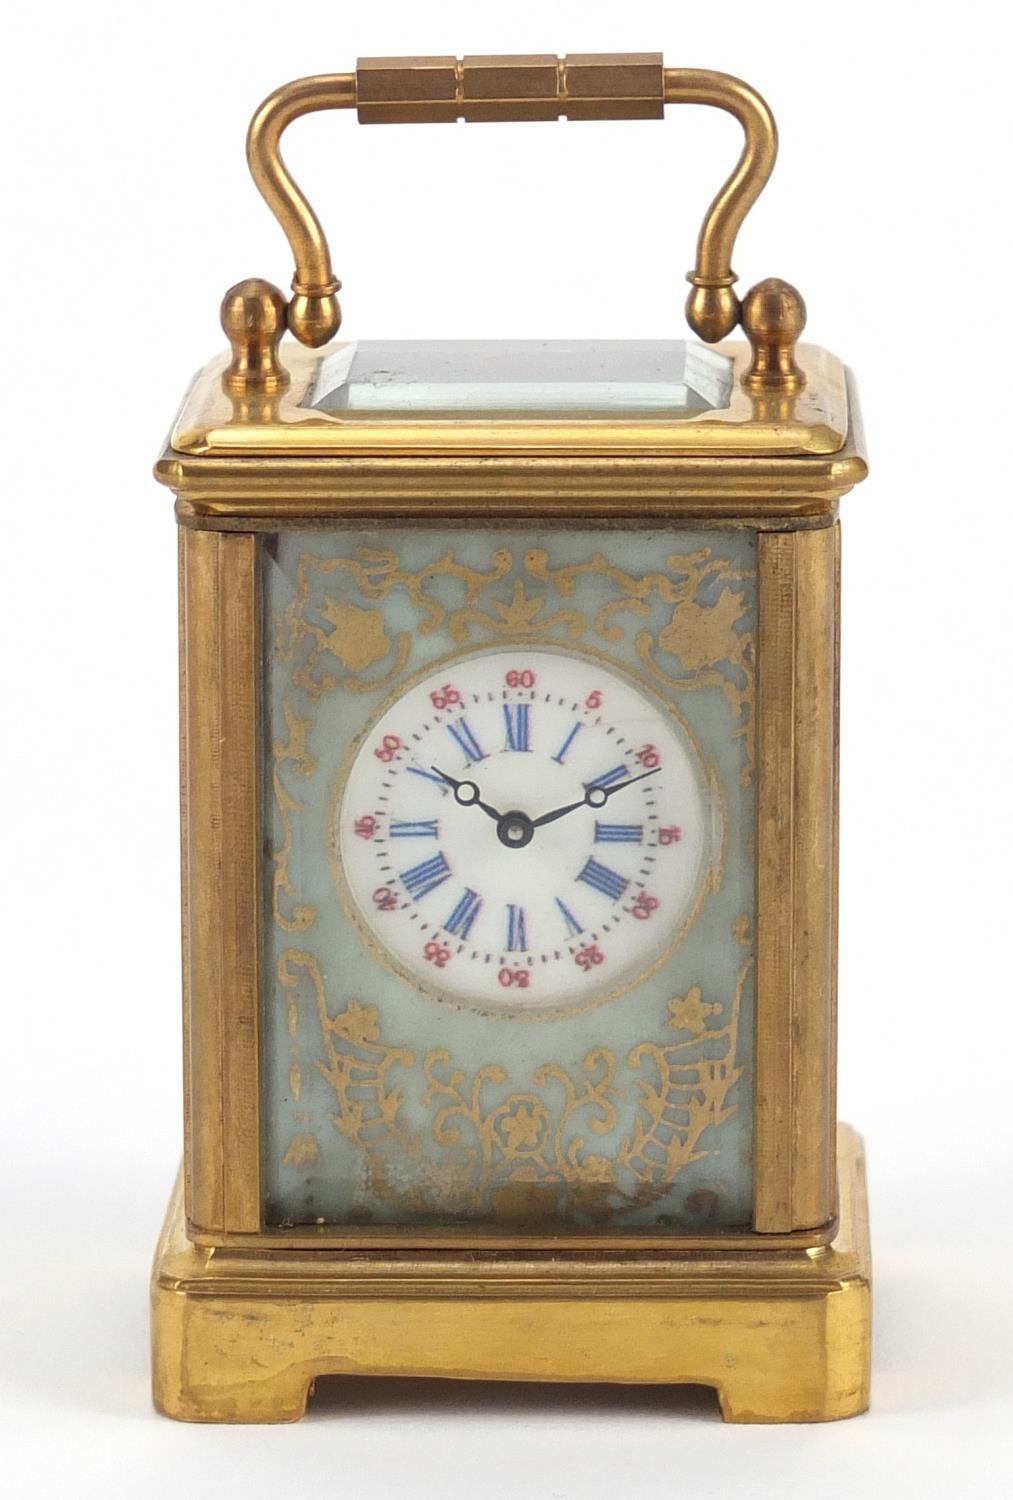 Miniature brass cased carriage clock with porcelain panels, hand painted and gilded with flowers, - Image 2 of 8